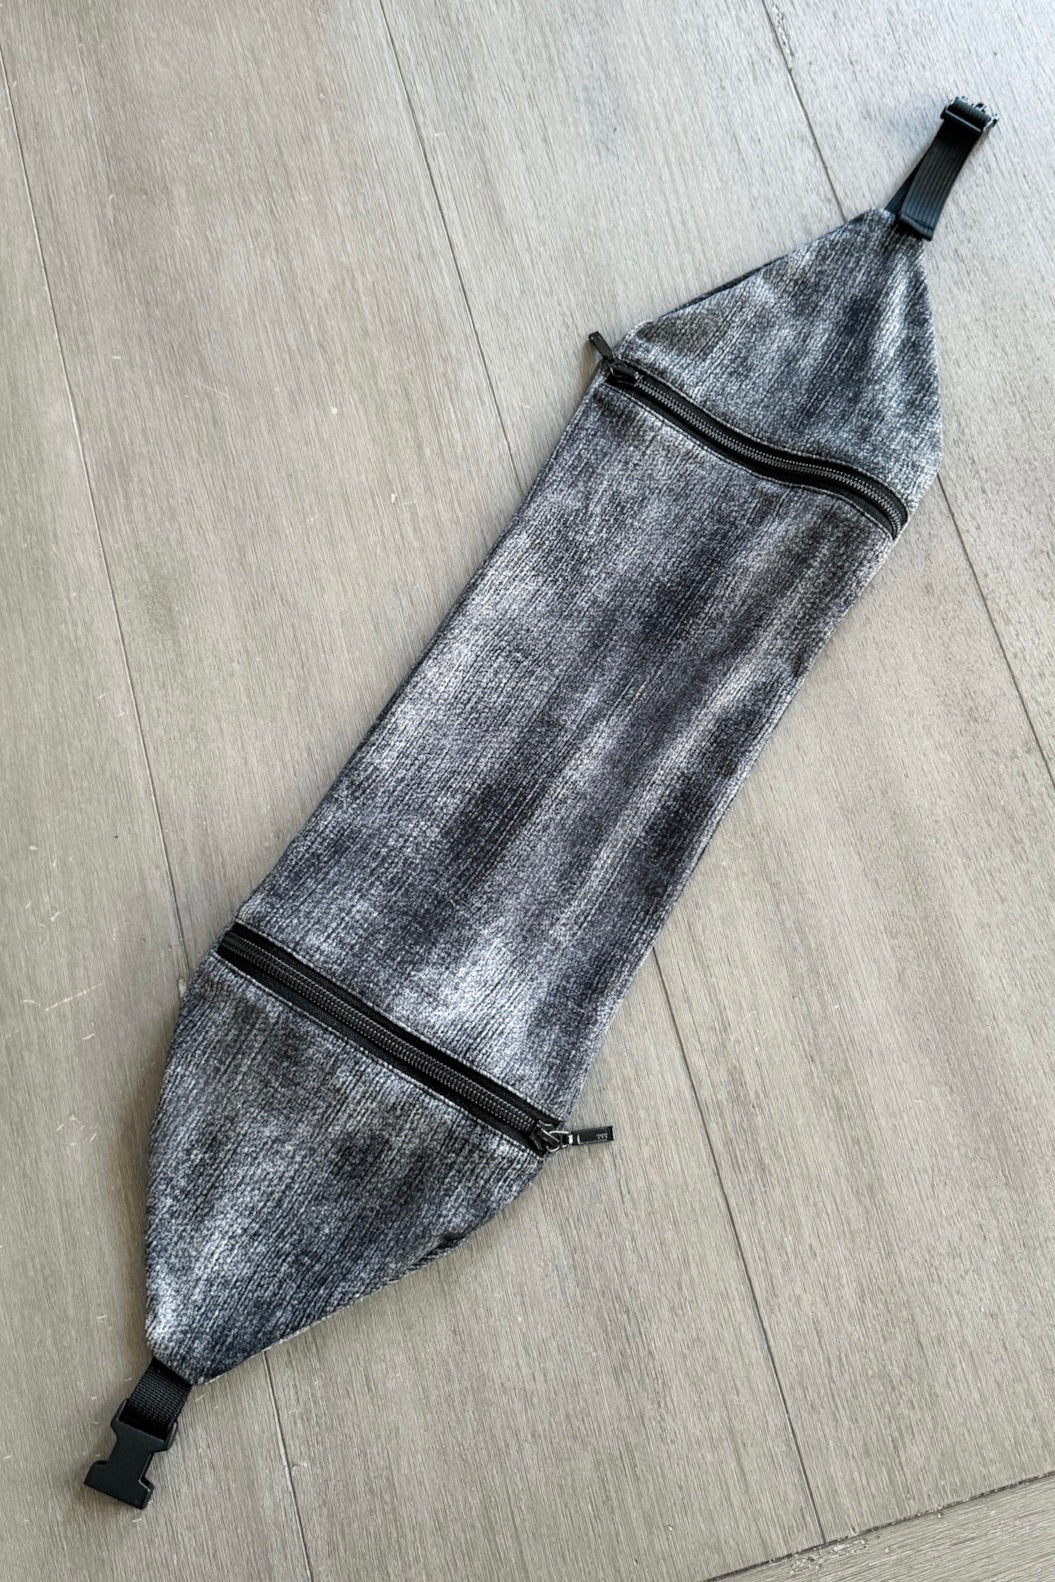 Packable Headrest in Charcoal Distressed Print